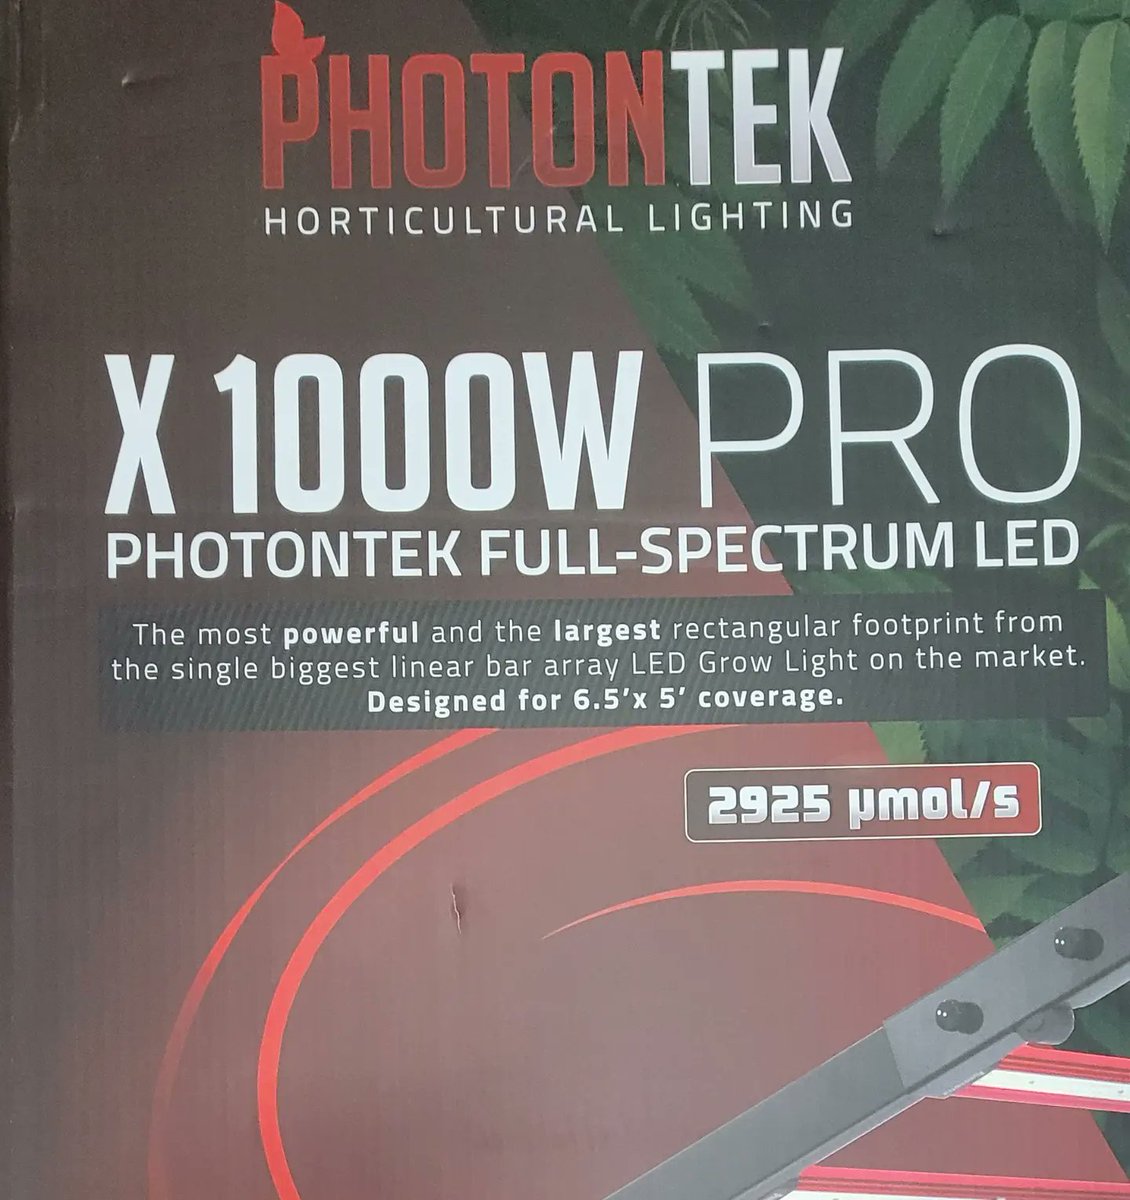 Come by youtube.com/@greengoblin510 at 6 pm EST to check out this beast of a light!